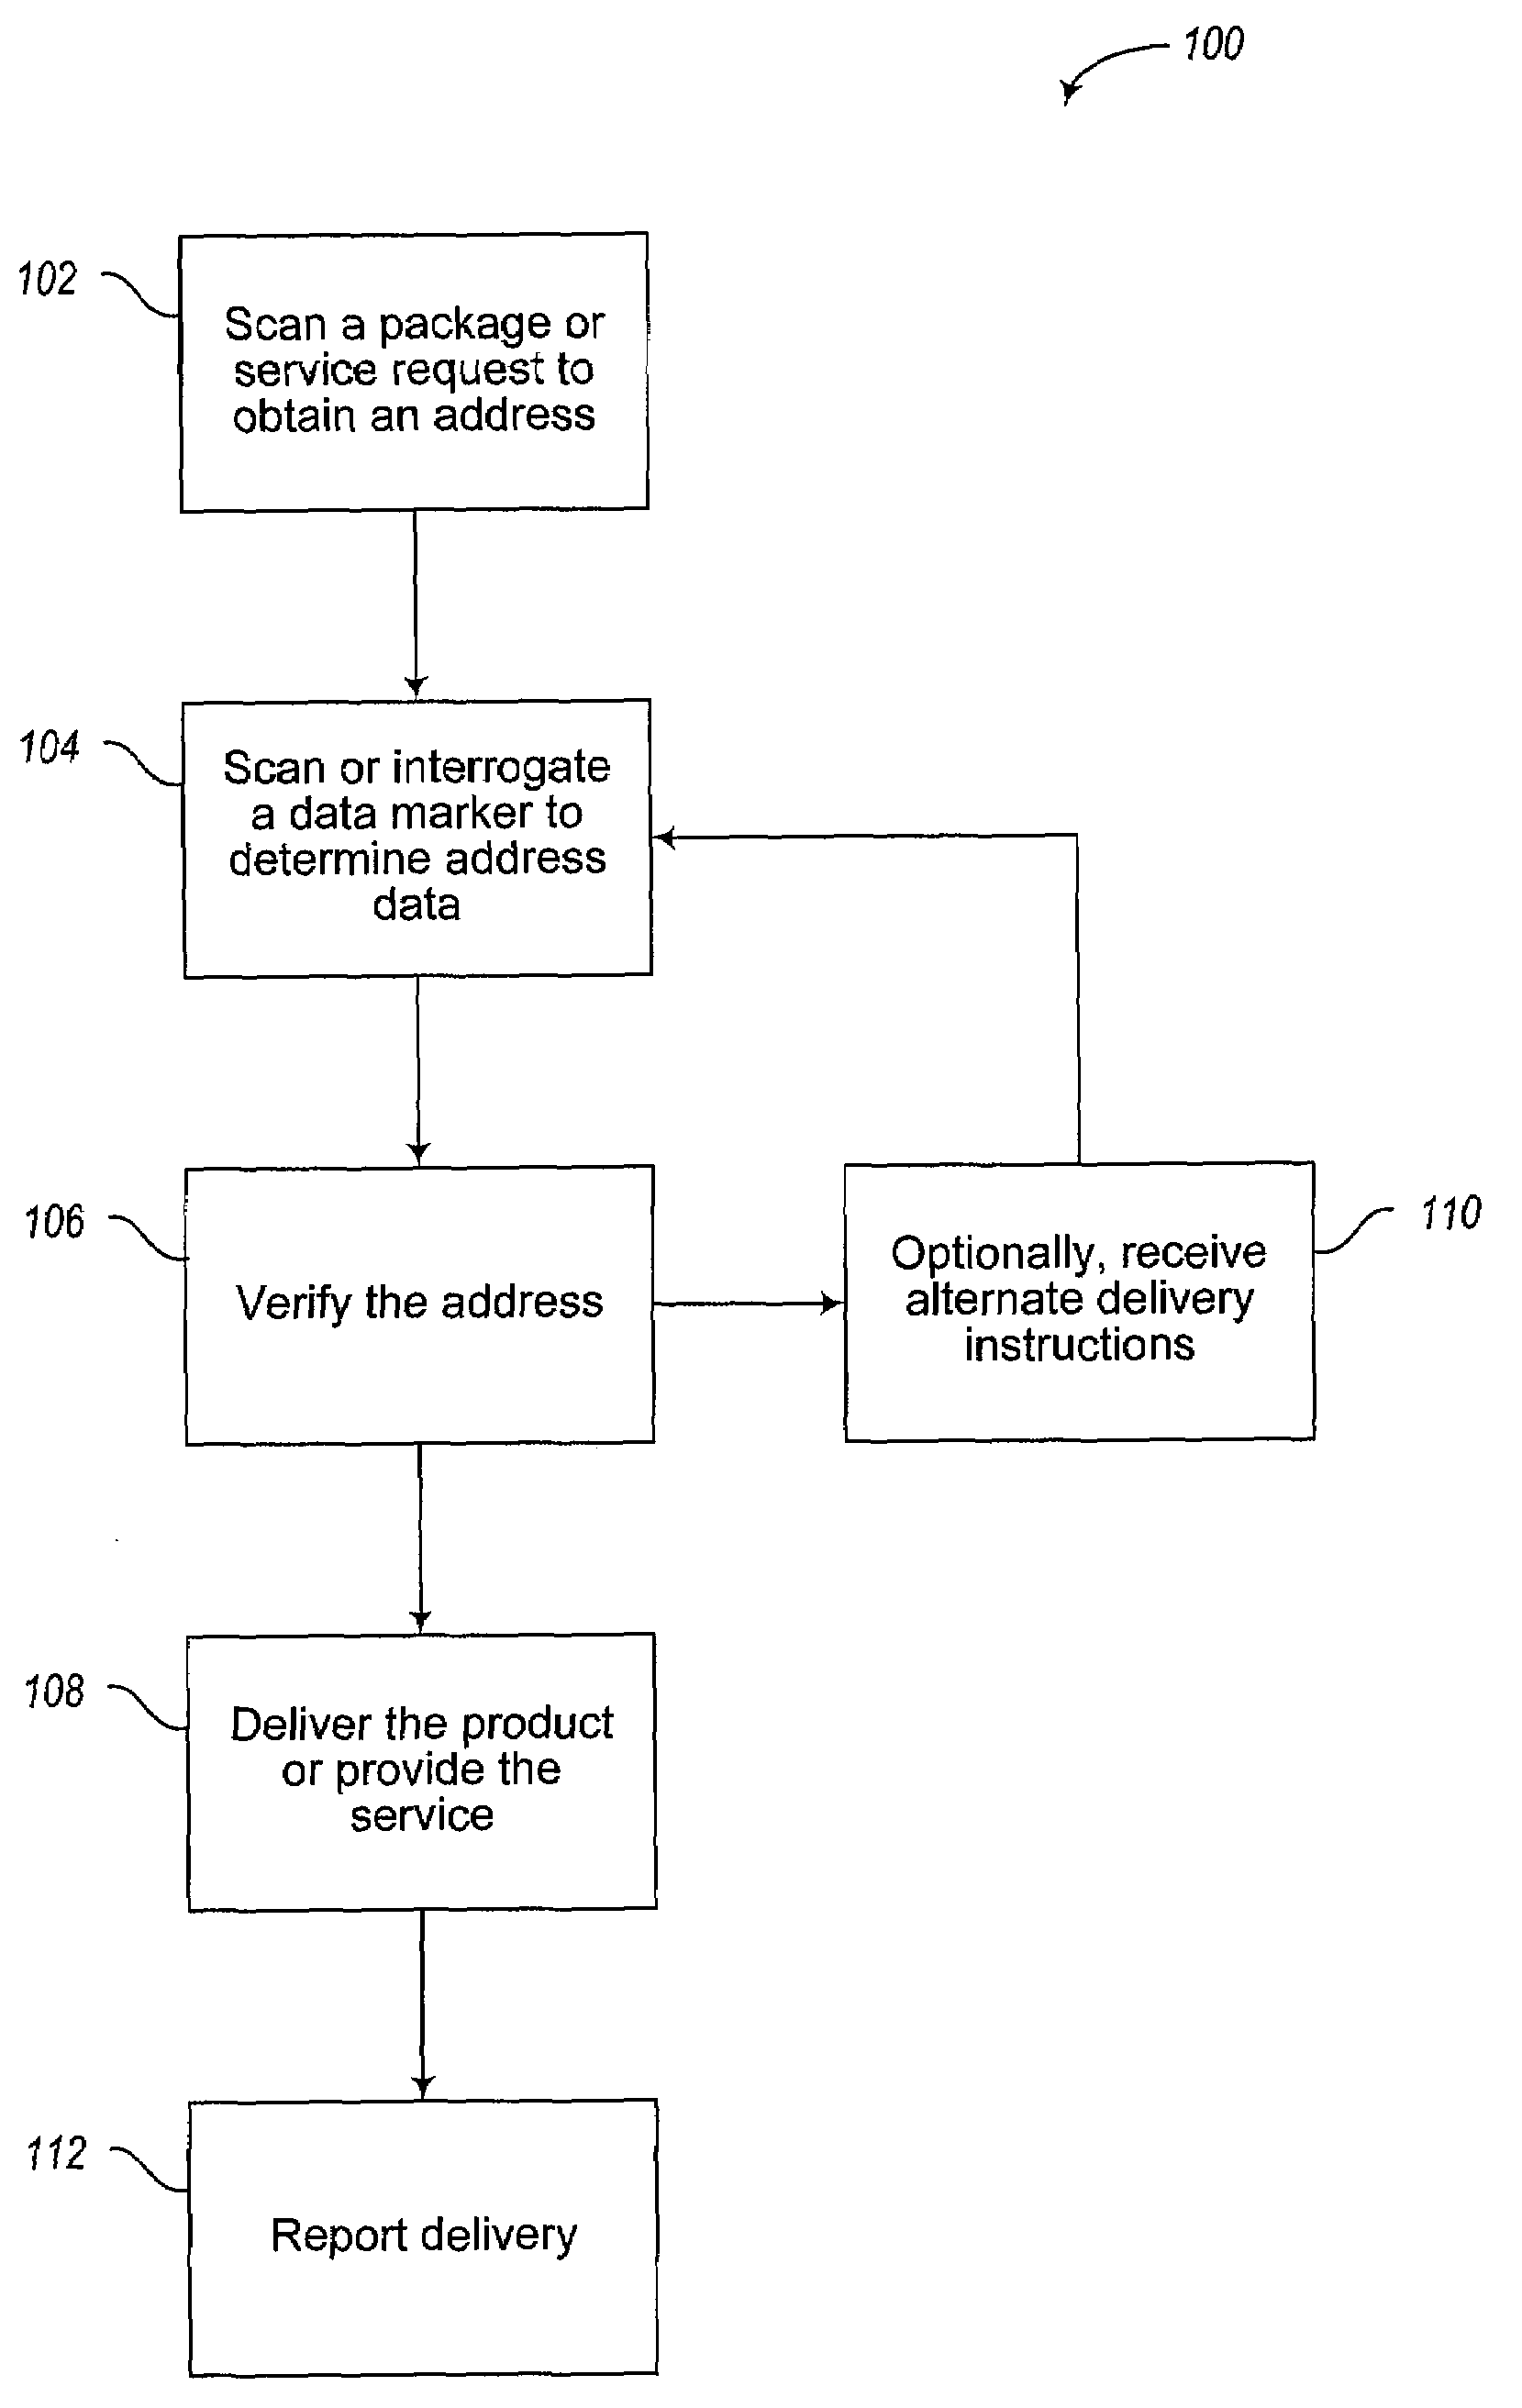 Method to verify or track a physical address while providing a service